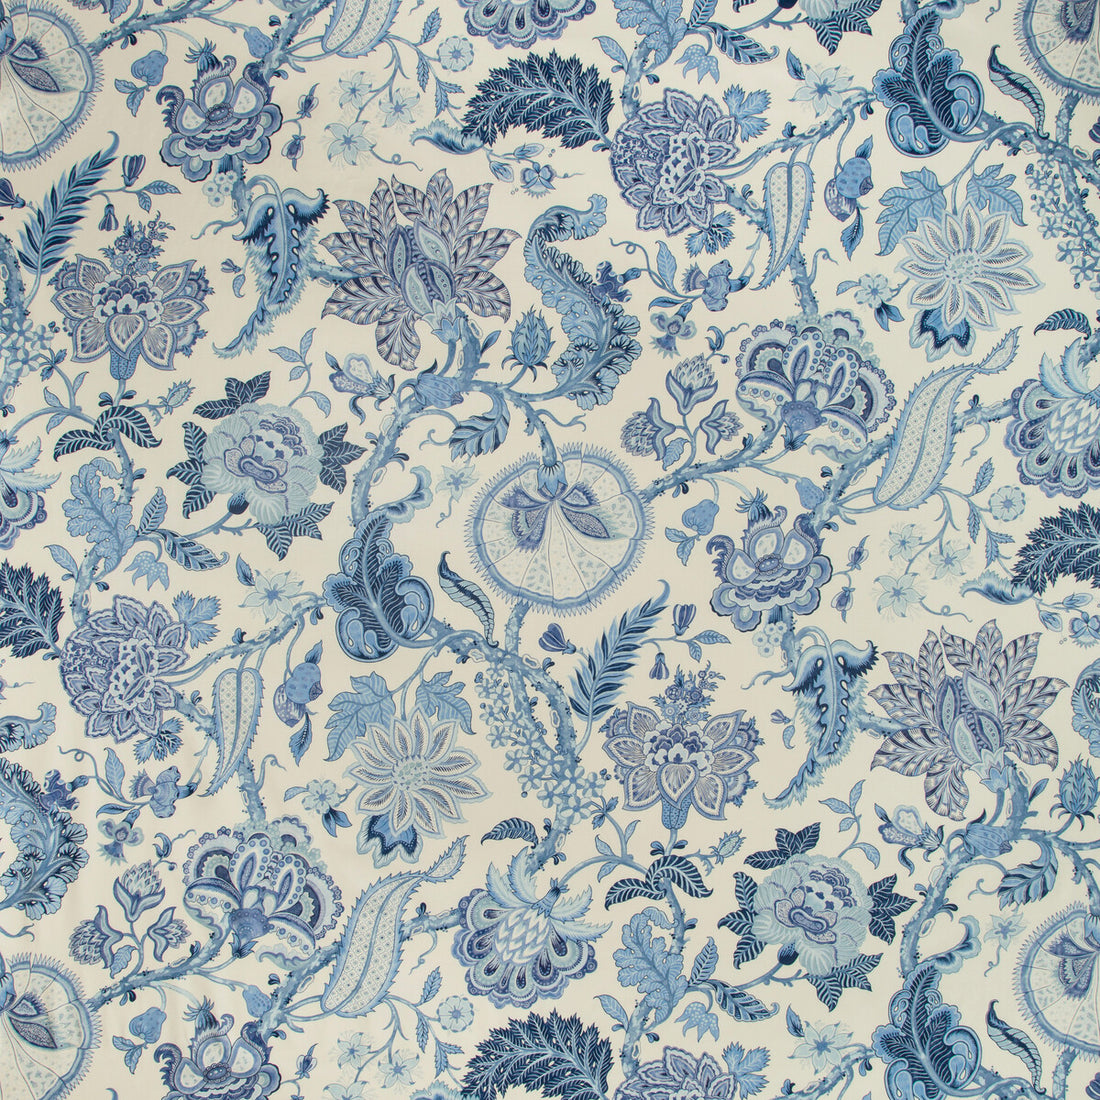 Saranda Print fabric in blue color - pattern 8019128.50.0 - by Brunschwig &amp; Fils in the Folio Francais collection